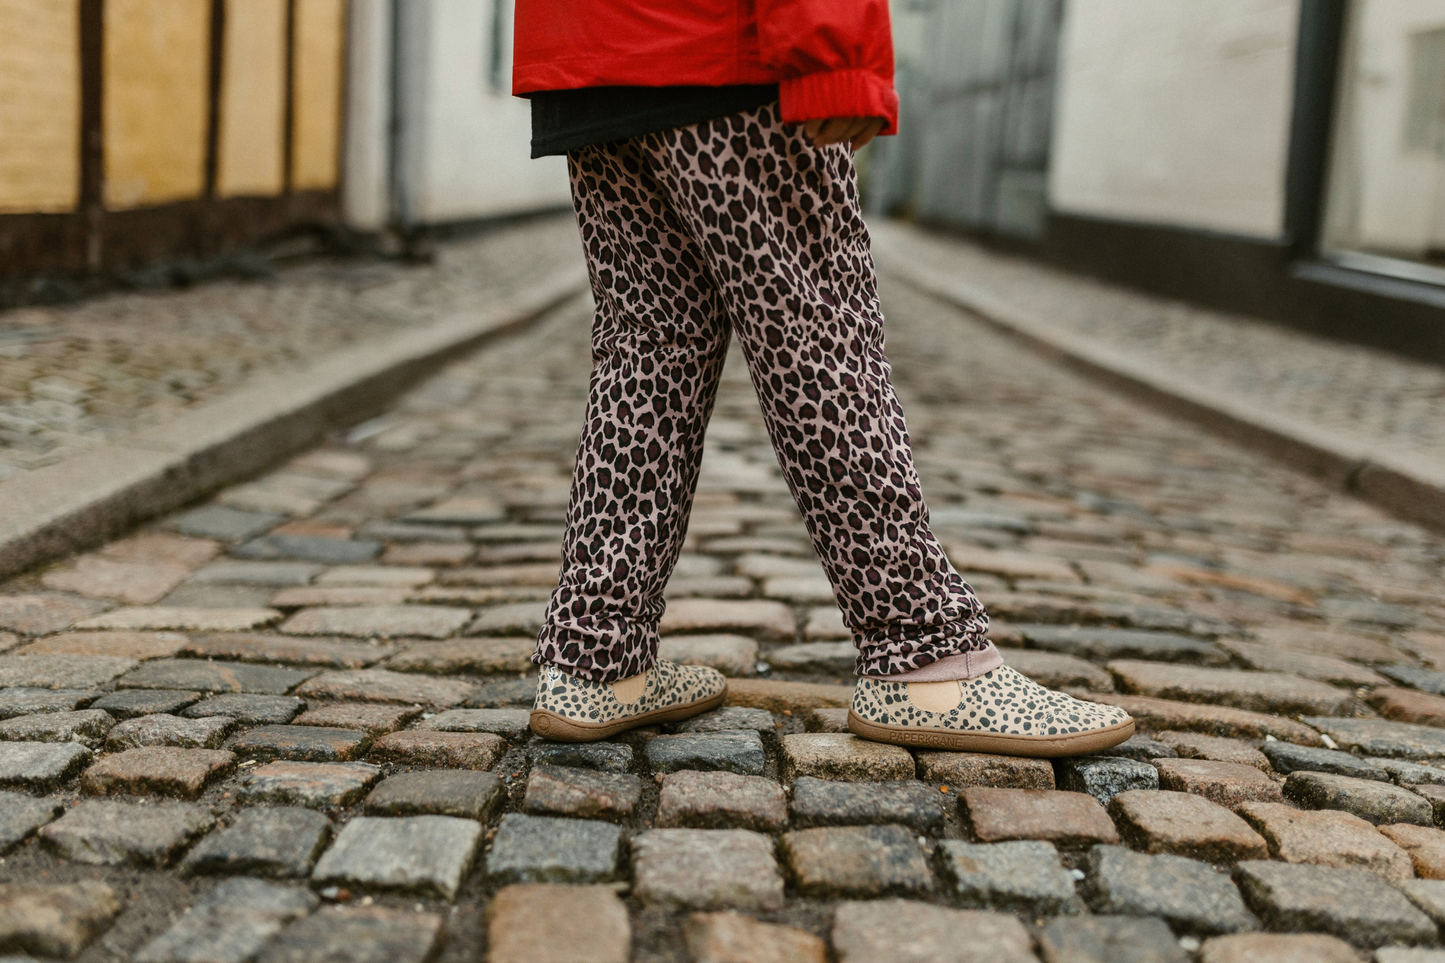 CHILD WALKING IN COBBLED STREET IN CHEETAH BOOTS